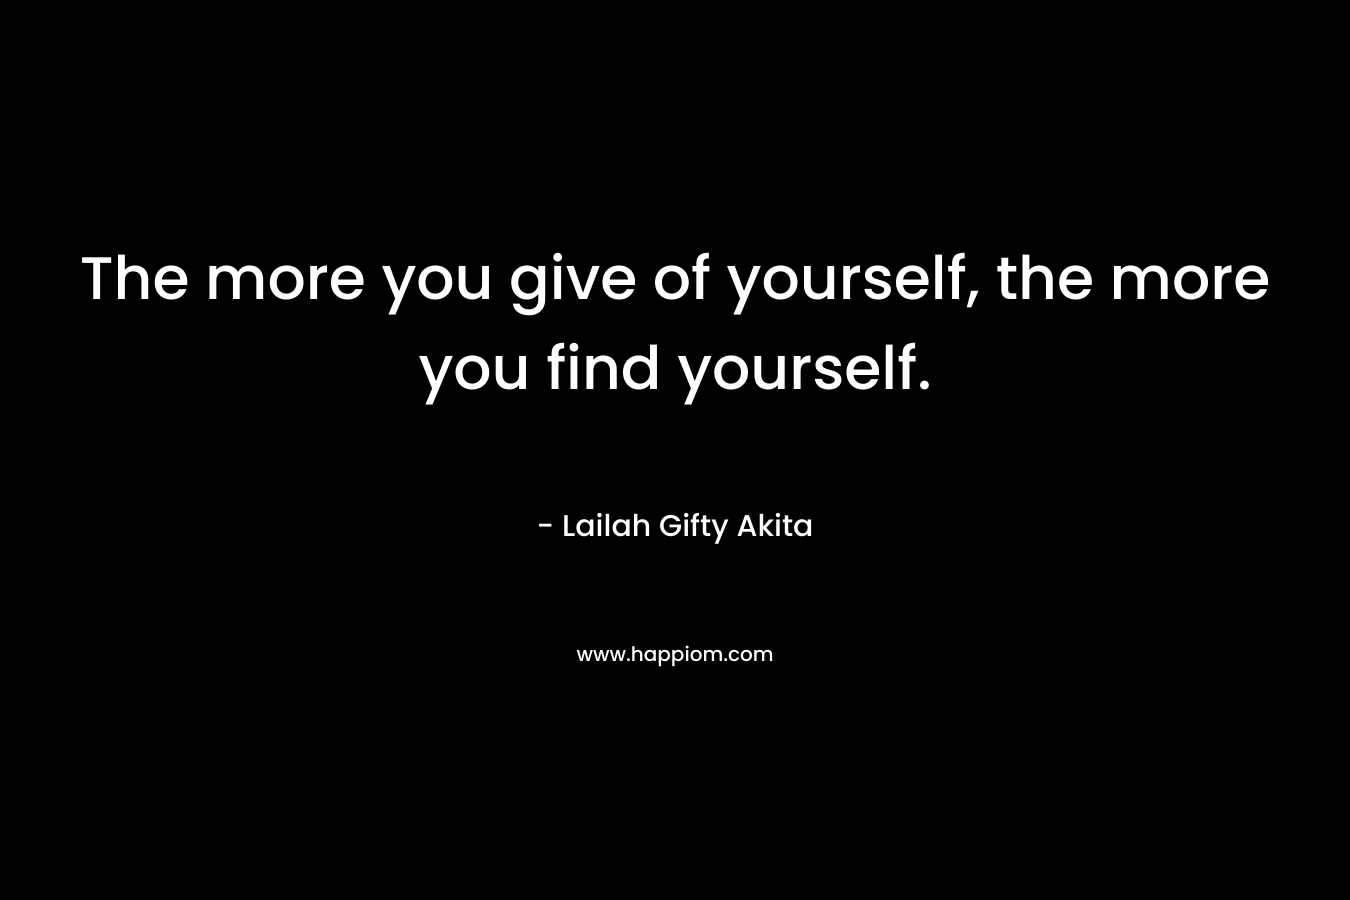 The more you give of yourself, the more you find yourself.